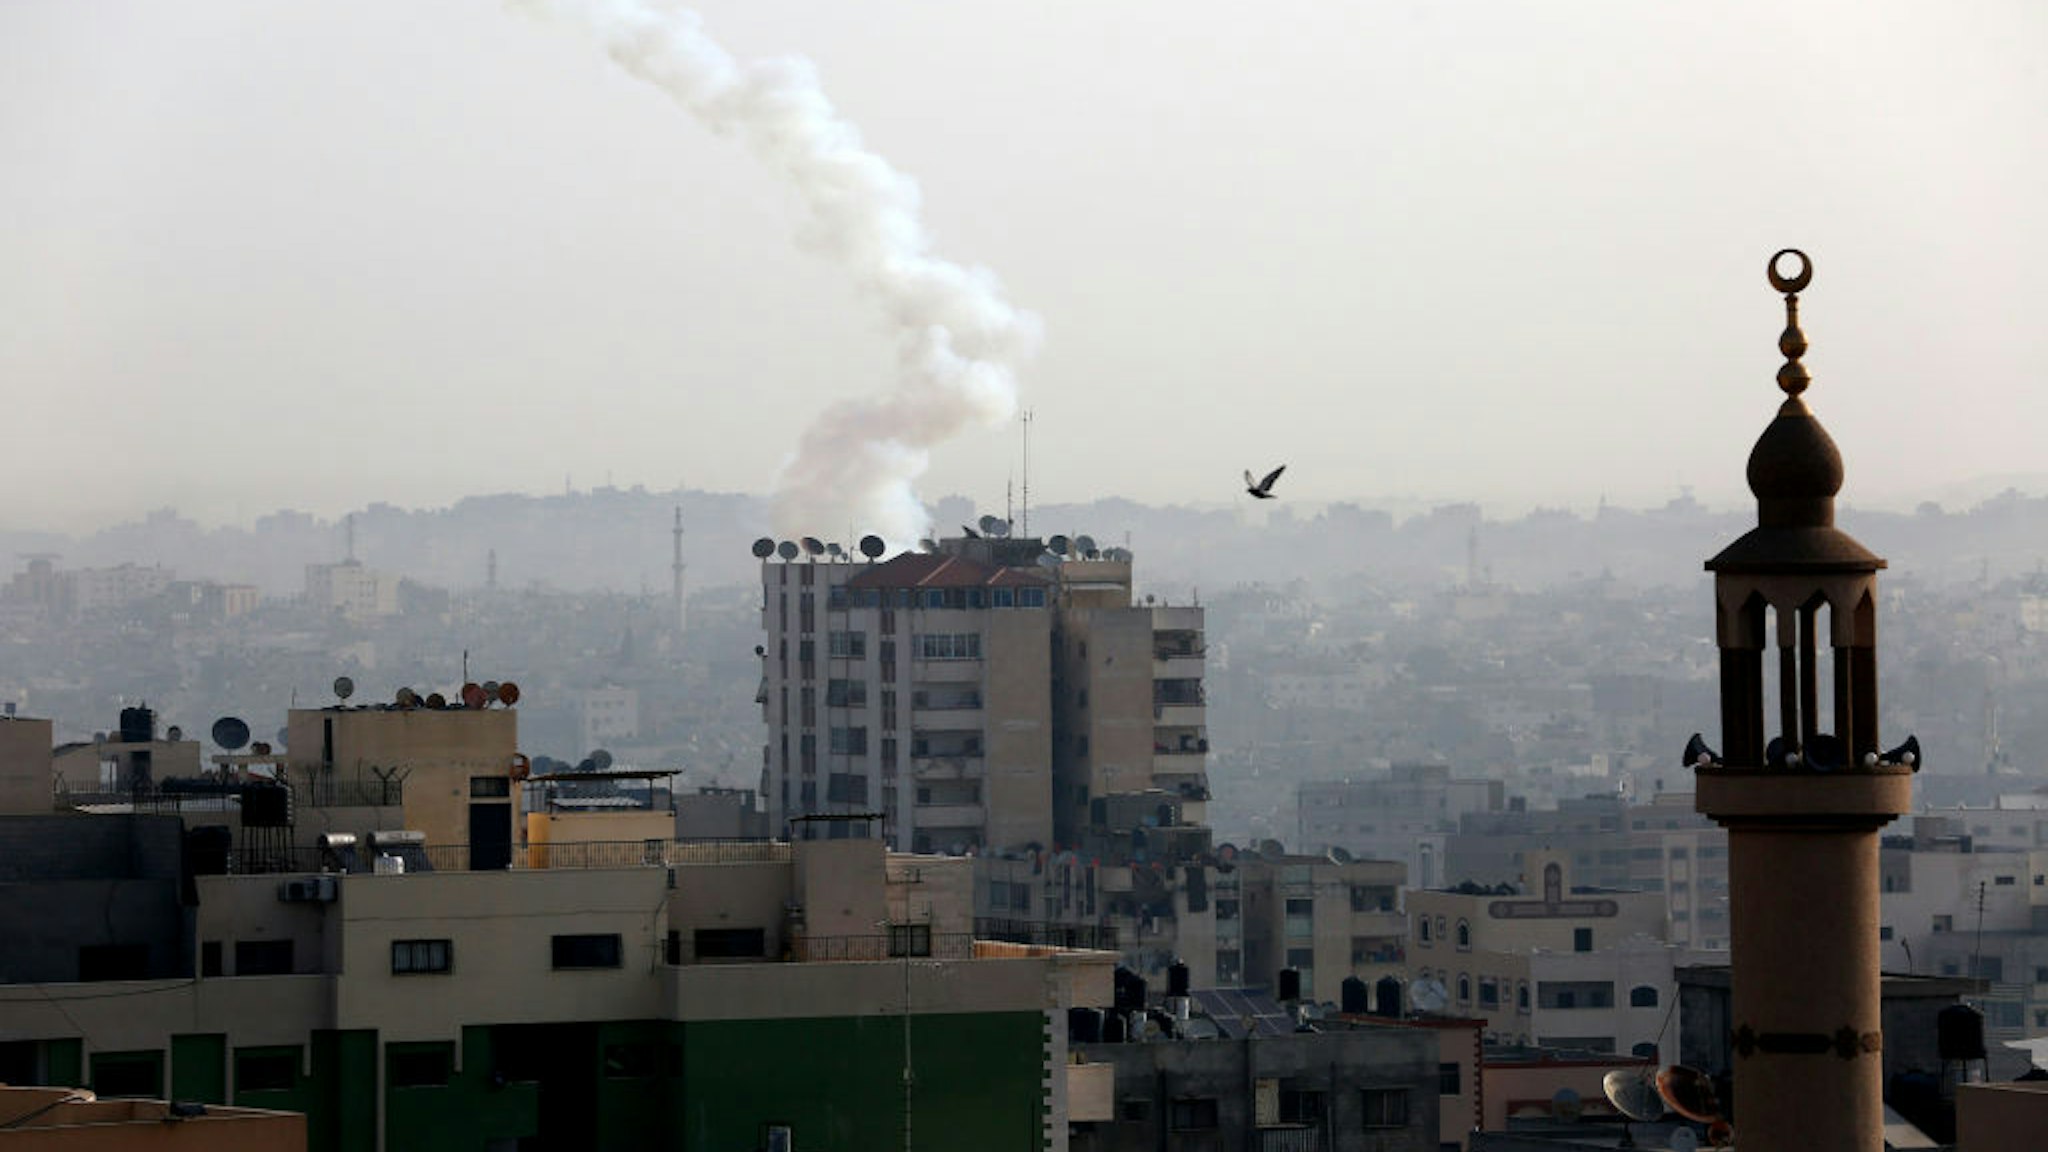 A Palestinian rocket is pictured in the air after being fired from Gaza city on November 13, 2019. - Israel's military killed a commander from Palestinian militant group Islamic Jihad in a strike on his home in the Gaza Strip, triggering exchanges of fire in a violent escalation that left another nine Gazans dead.